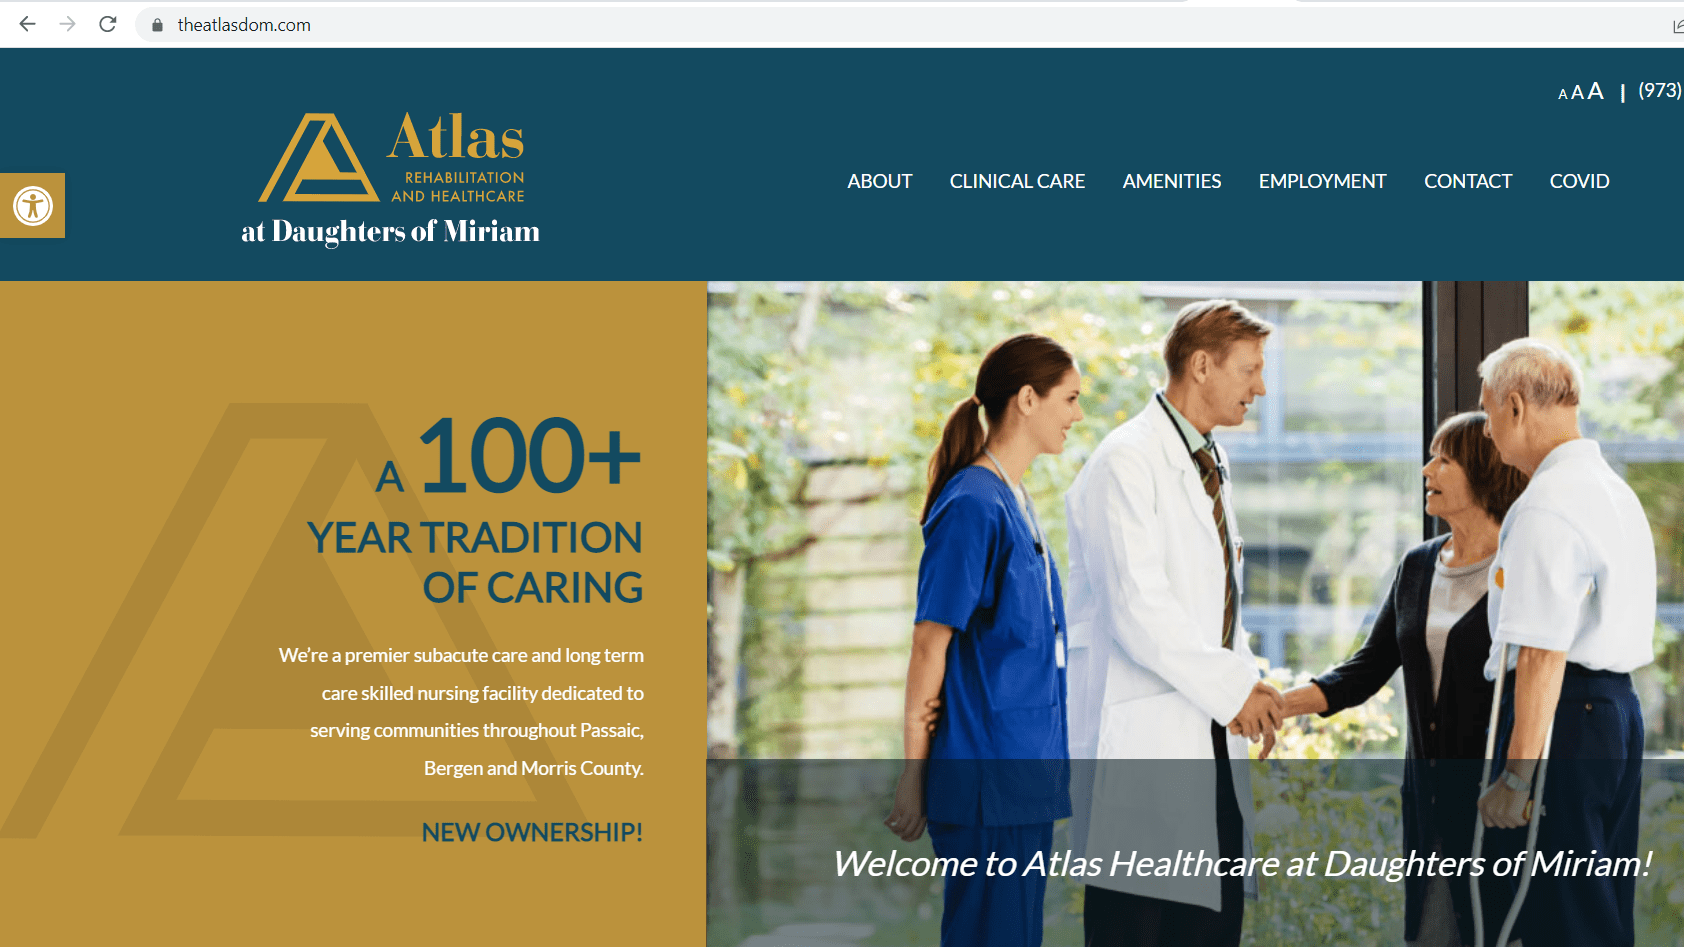 Atlas Rehabilitation & Healthcare at Daughters of Miriam - Clifton, New Jersey